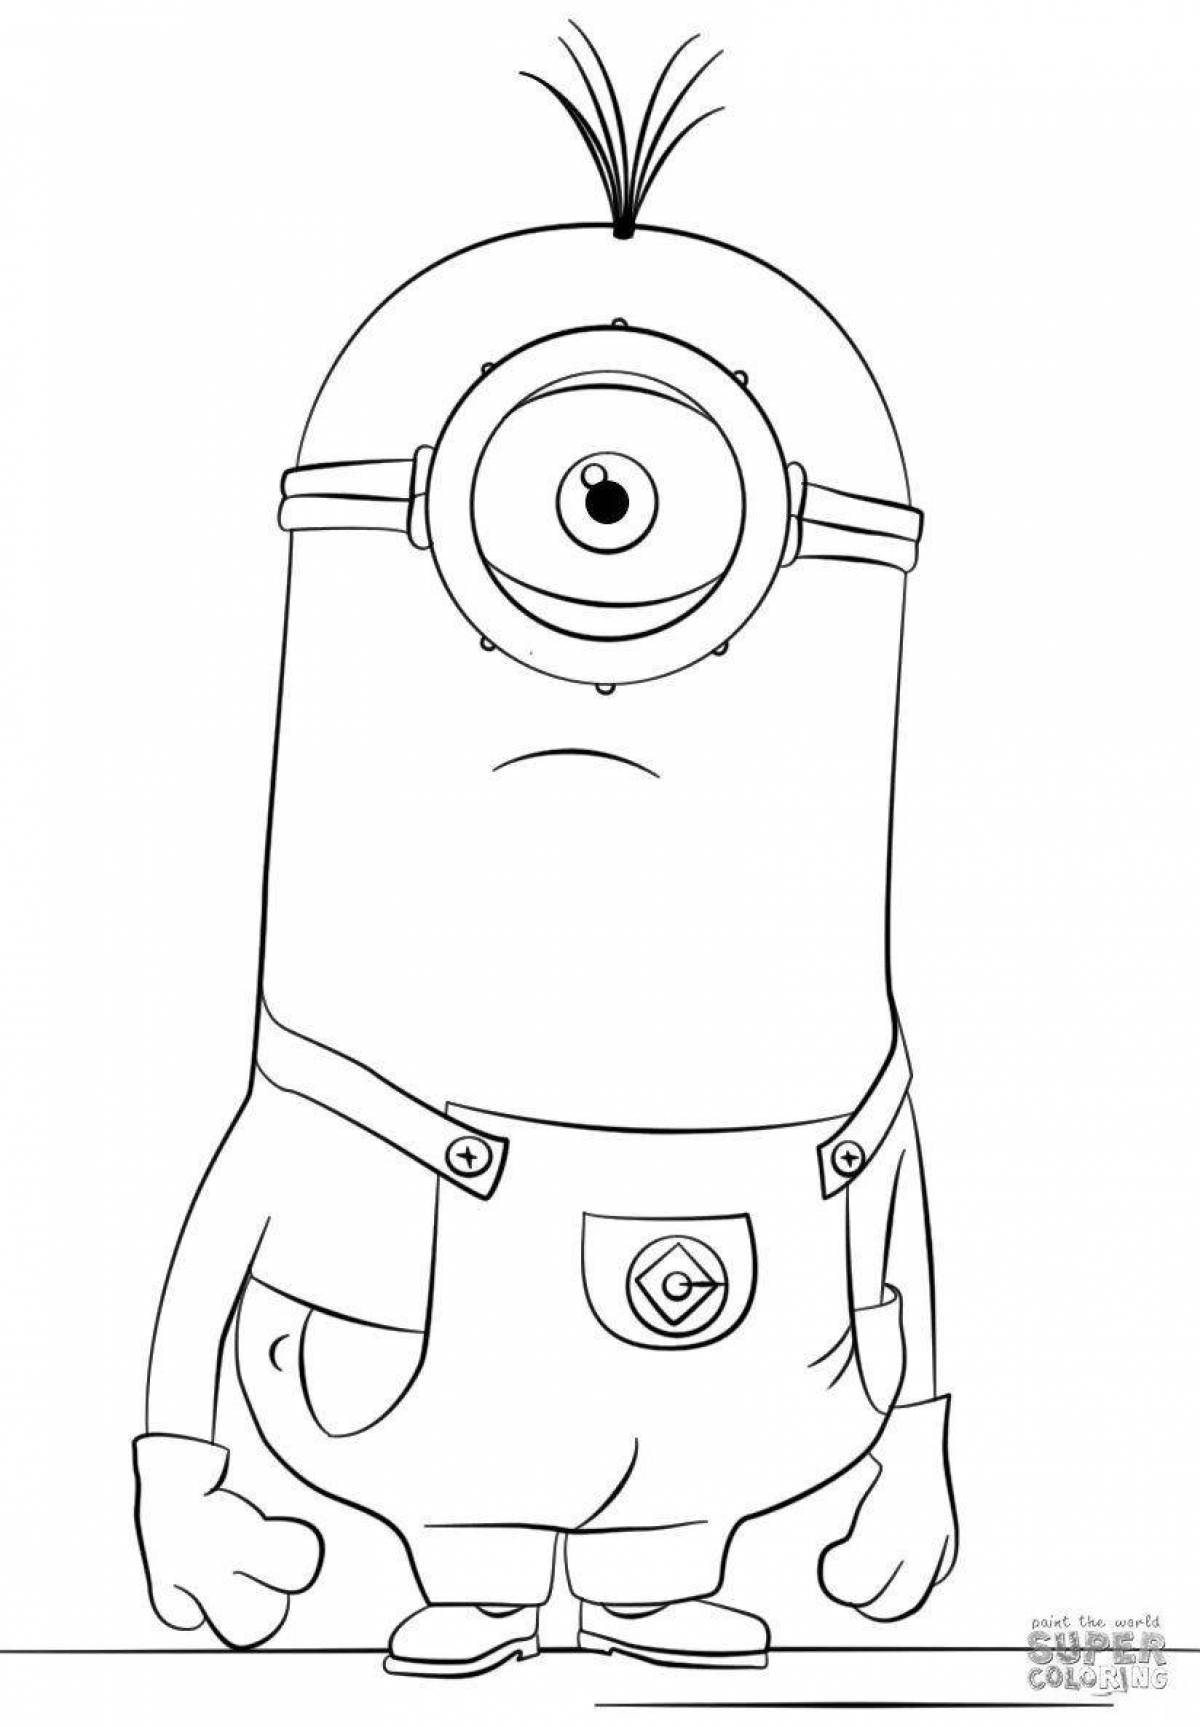 Coloring funny kevin the minion